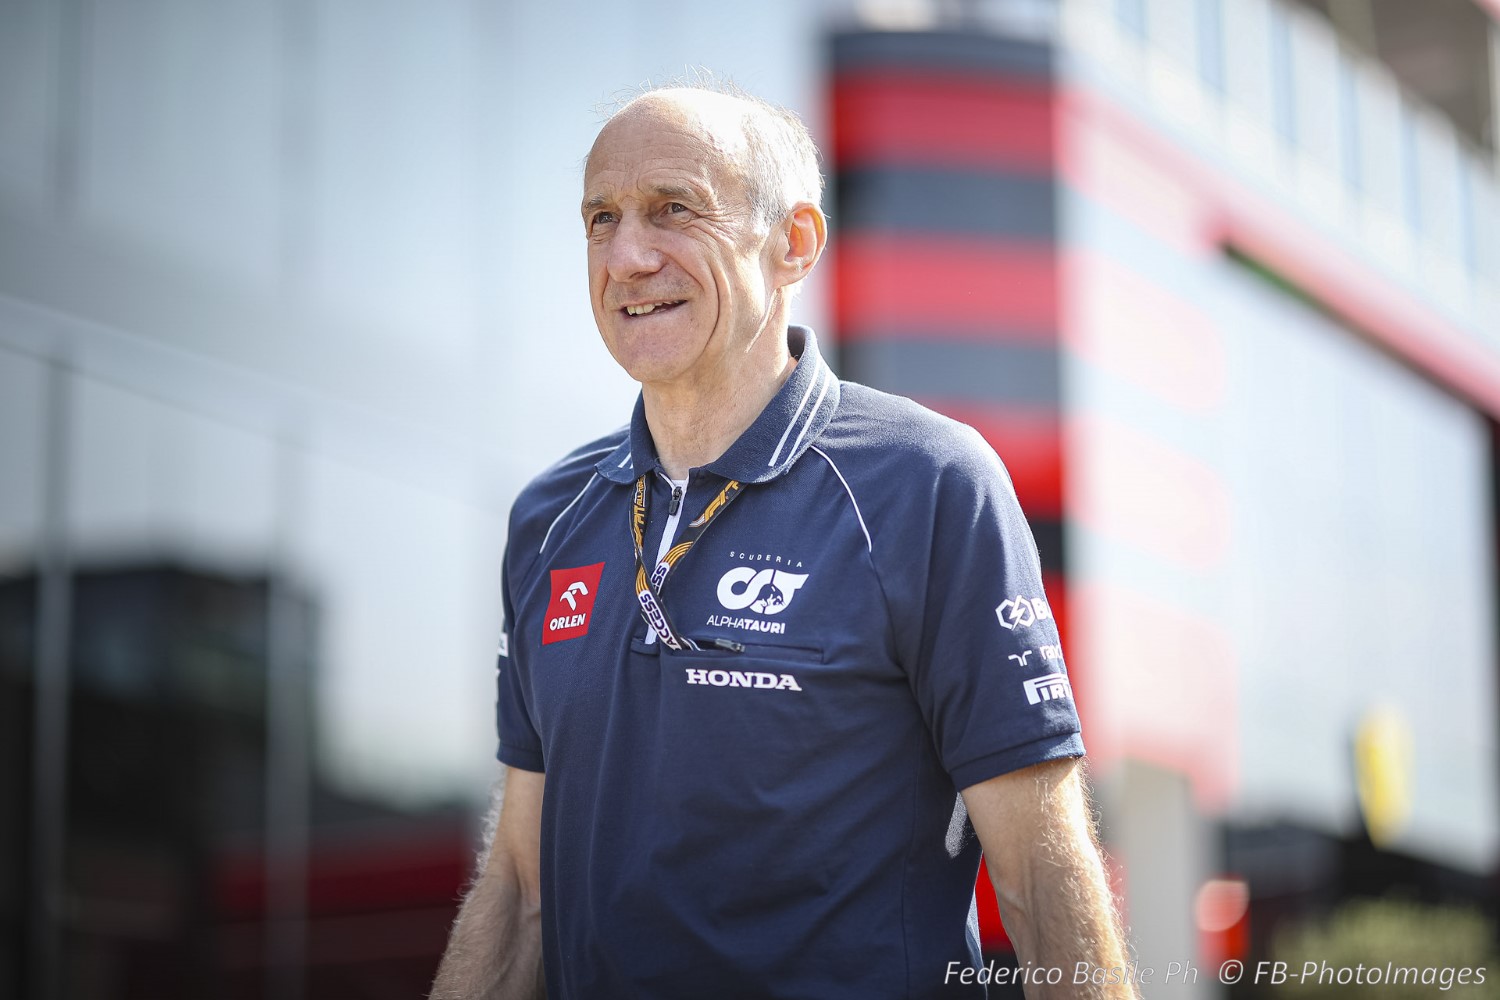 Franz Tost Team Principal at Alpha Tauri during the Austrian GP, Spielberg 29 June-2 July 2023 at the RedBull Ring, Formula 1 World championship 2023.